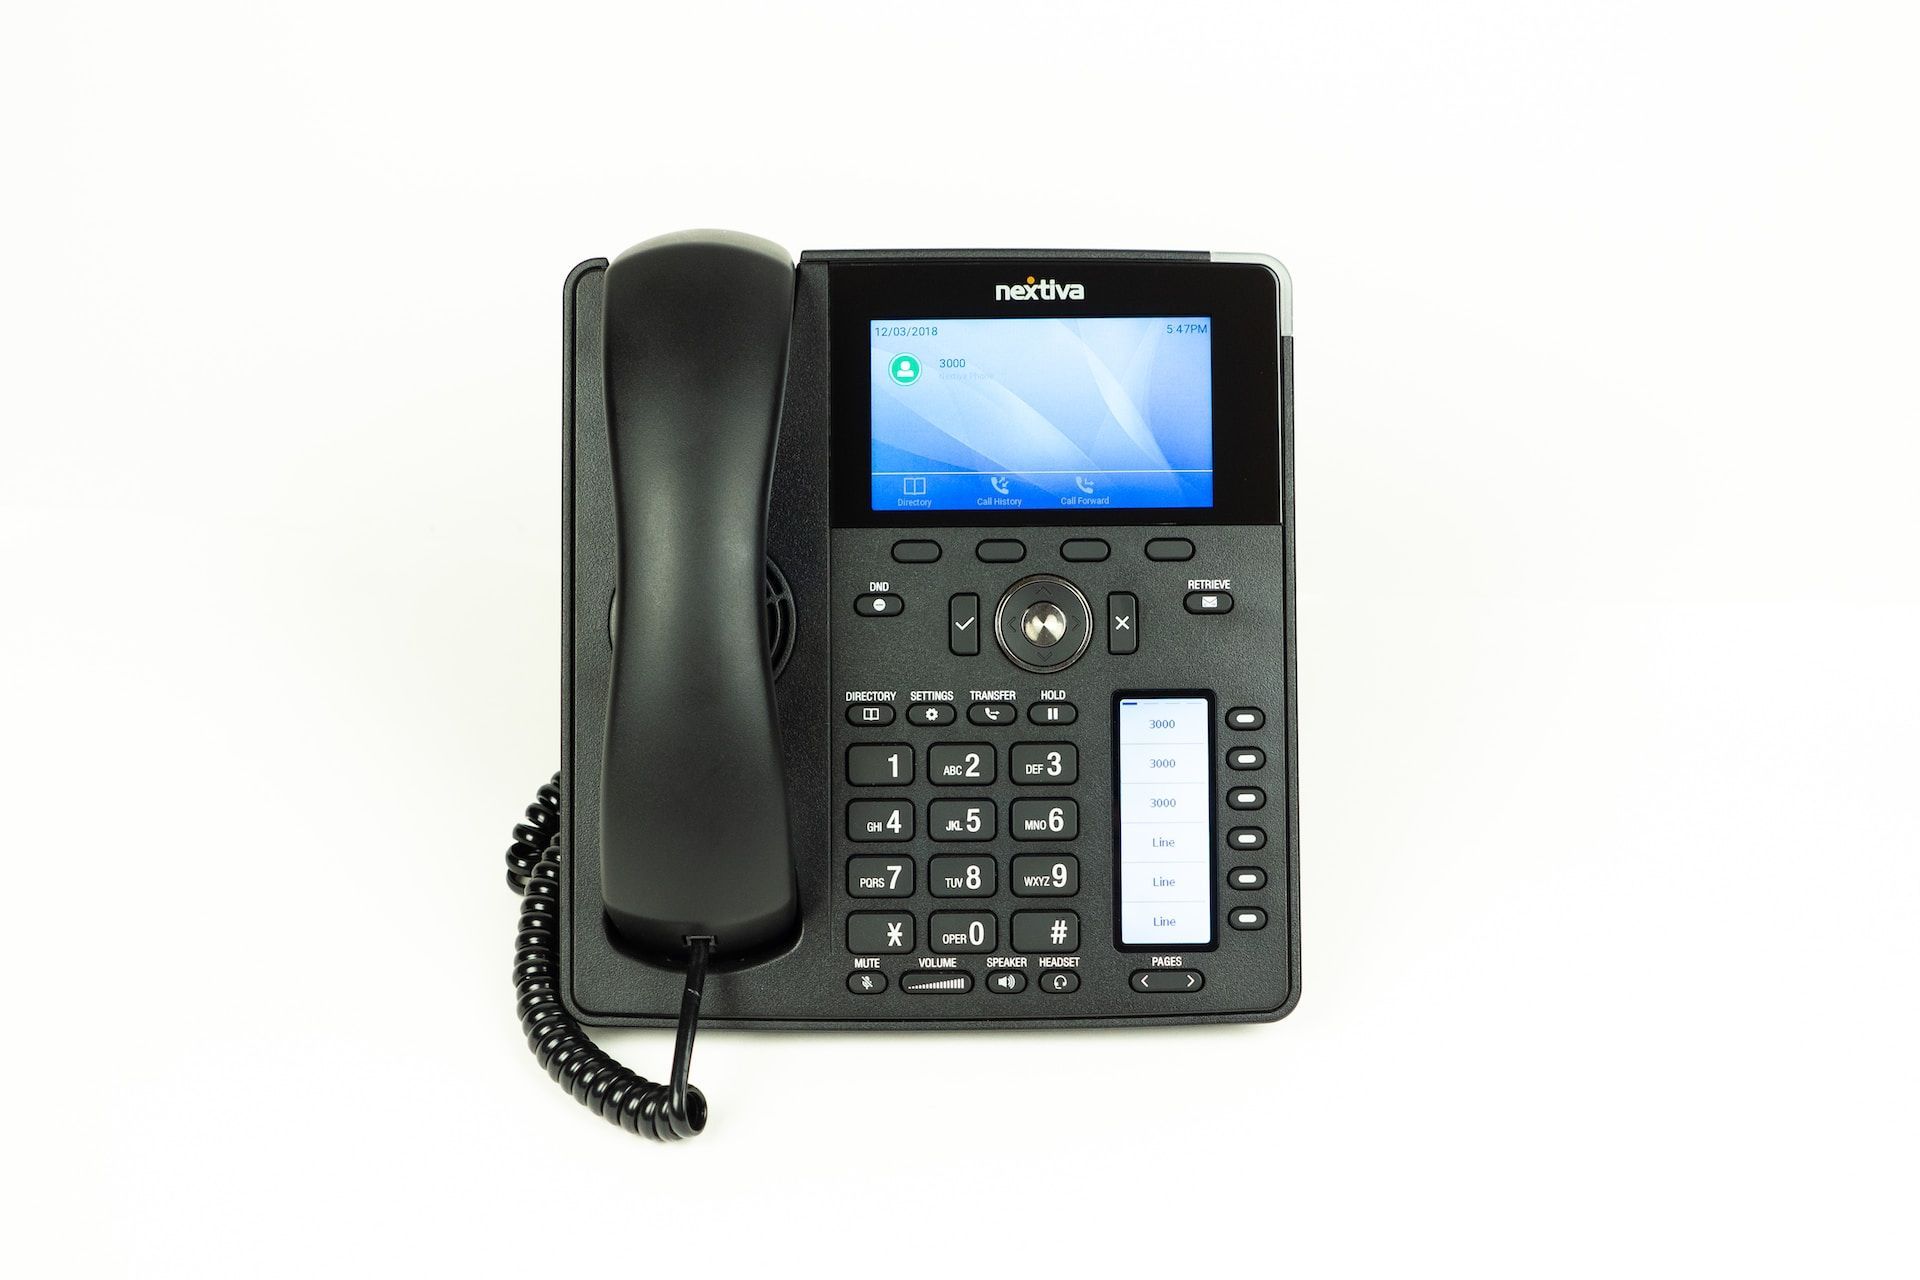 VoIP. Business phone. Ooma phone service. Ooma authorized service provider.